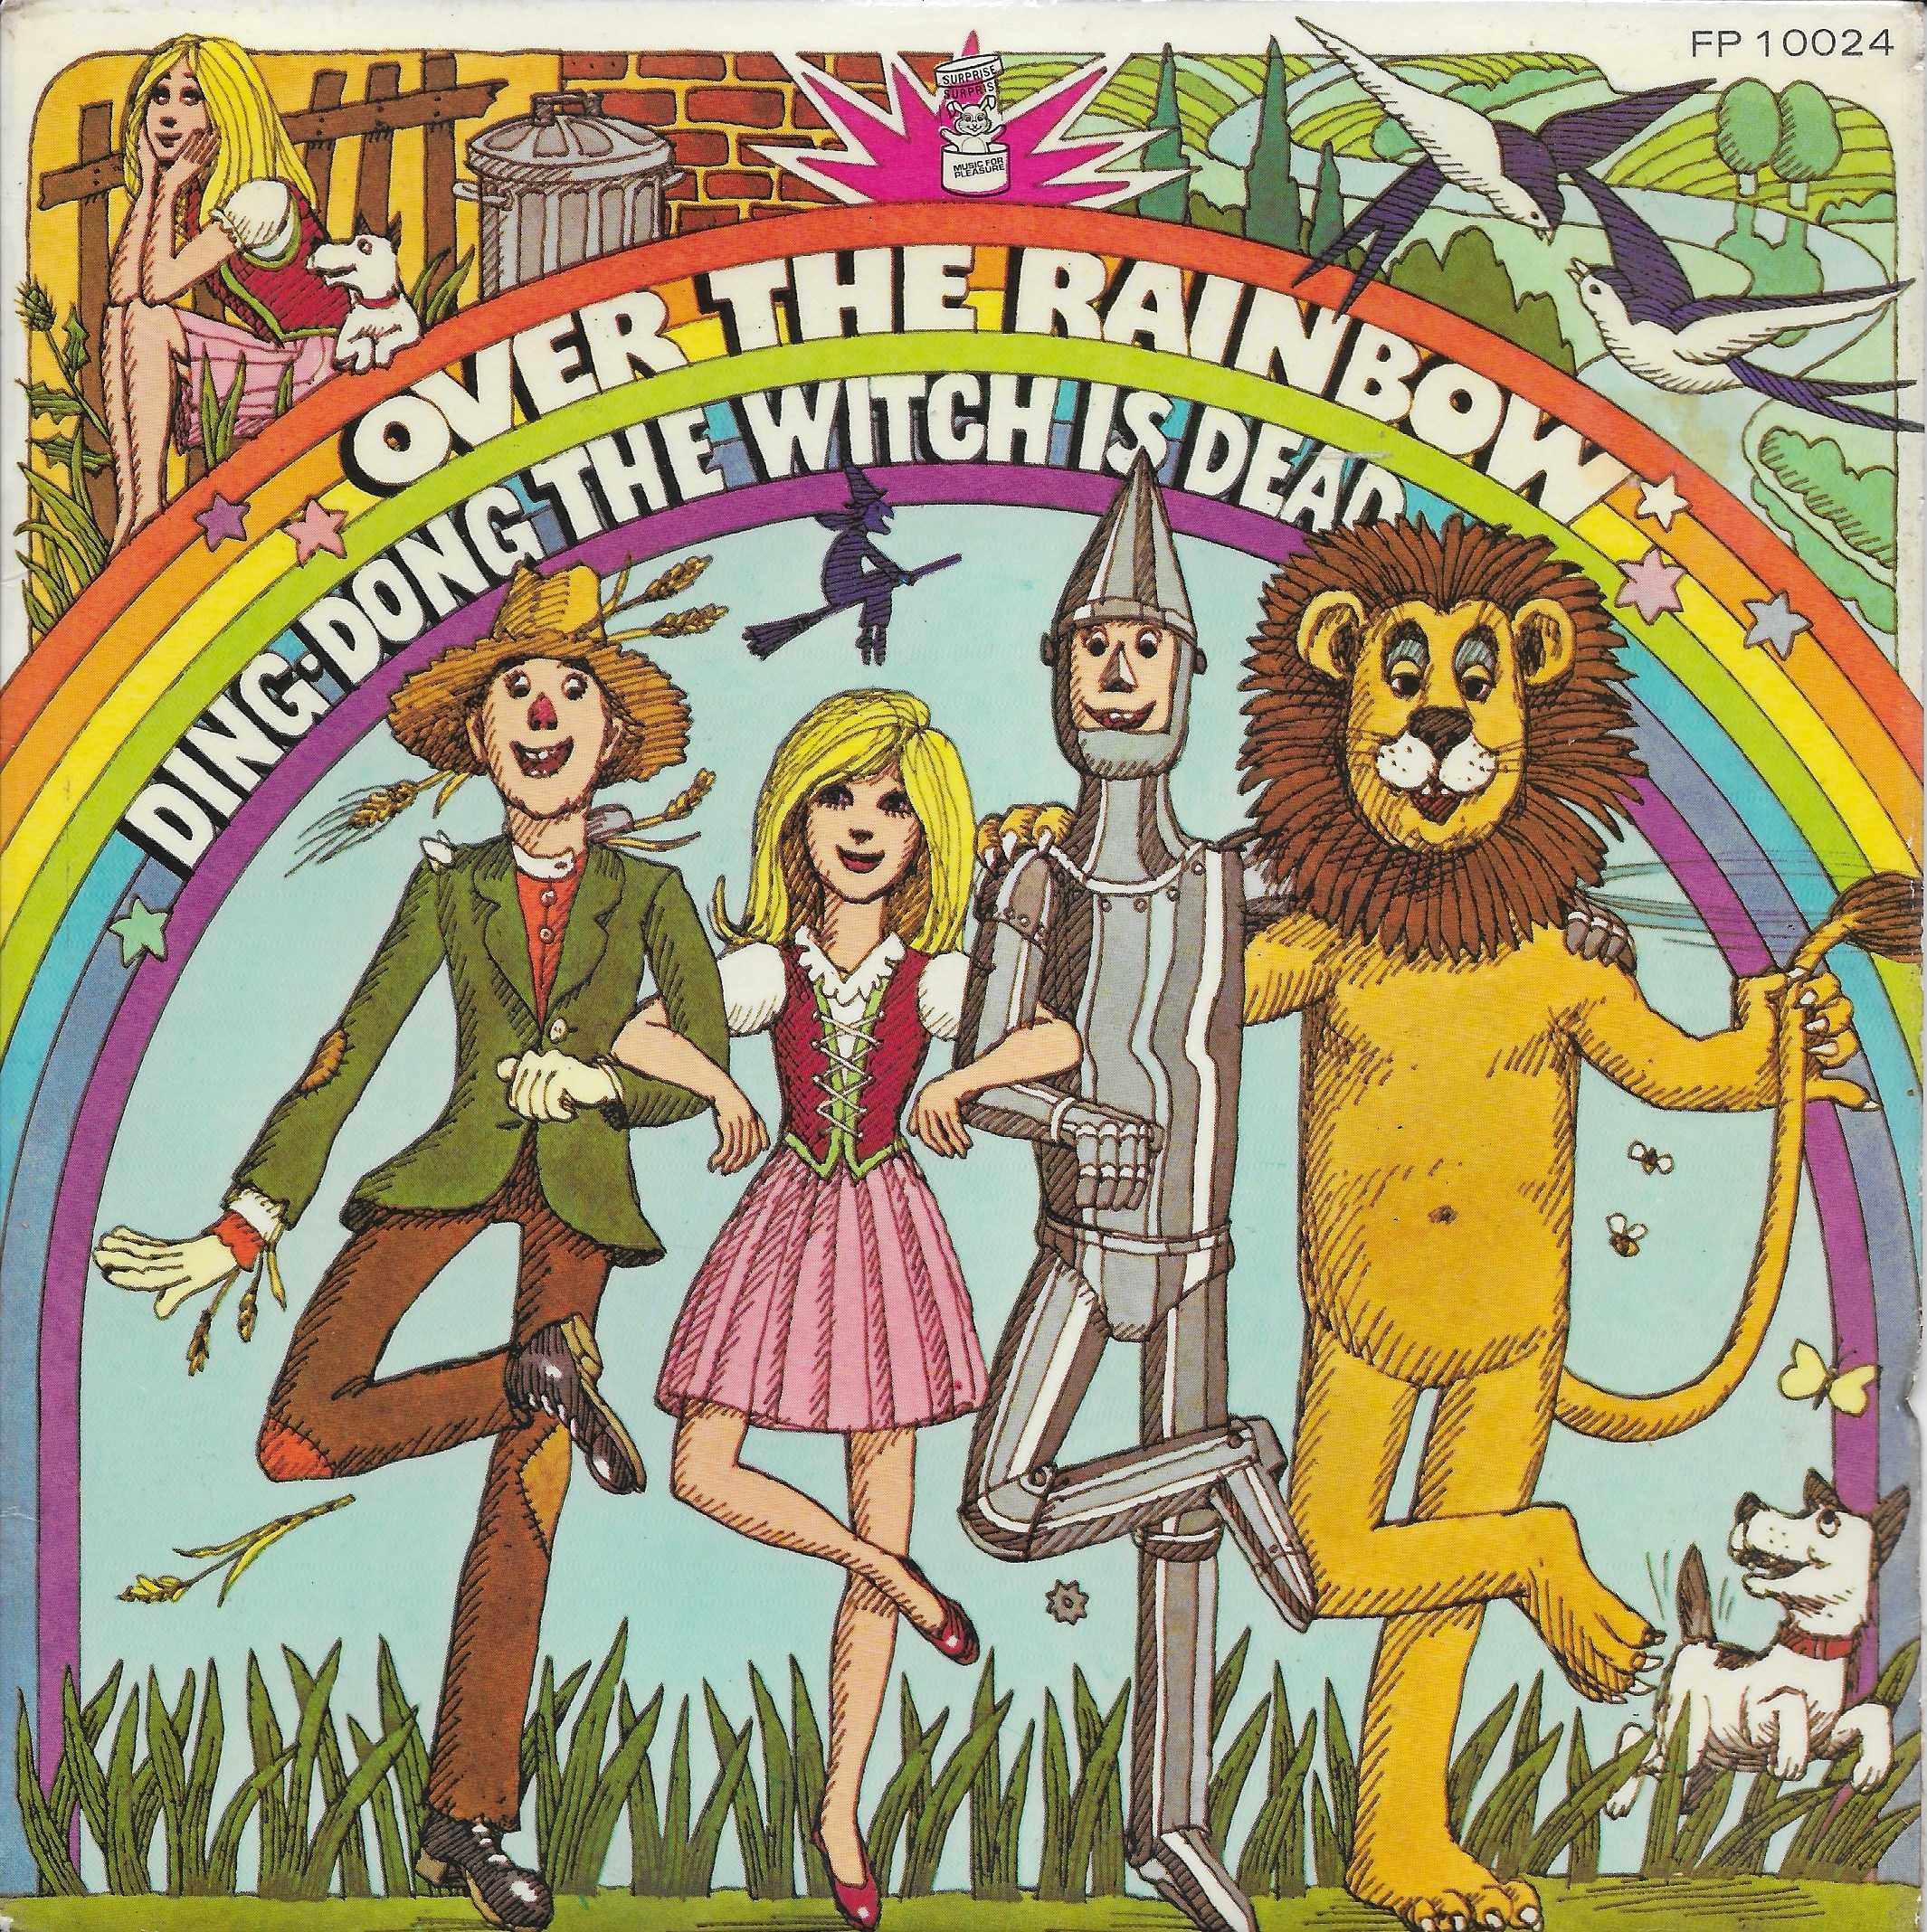 Picture of The Wizard of Oz by artist Harburg / Arlen from ITV, Channel 4 and Channel 5 singles library